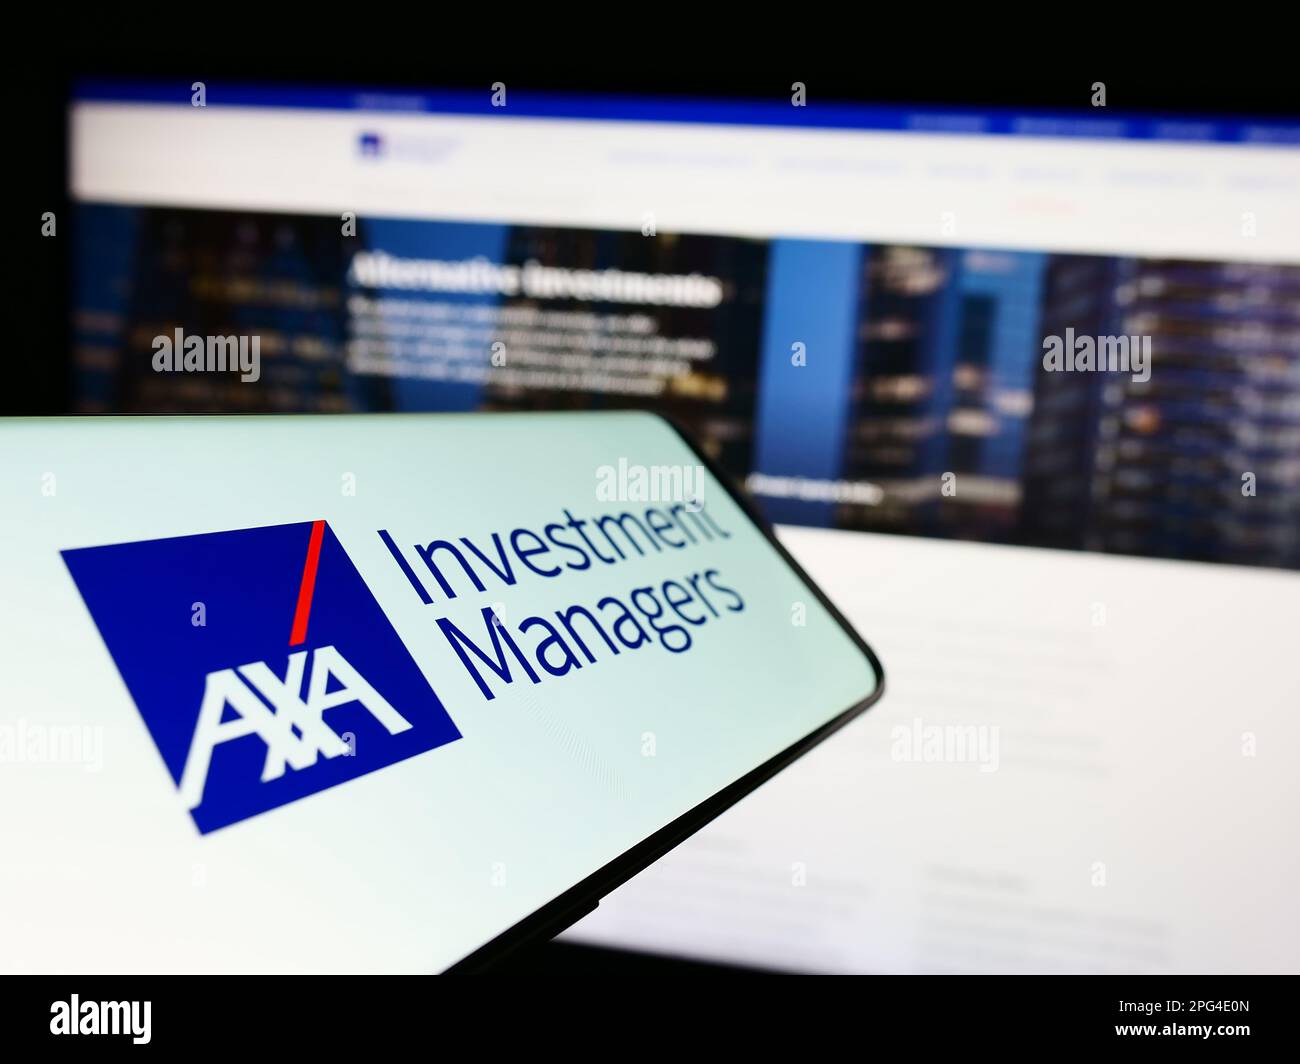 Cellphone with logo of investment company Axa Investment Managers on screen in front of business website. Focus on center-left of phone display. Stock Photo